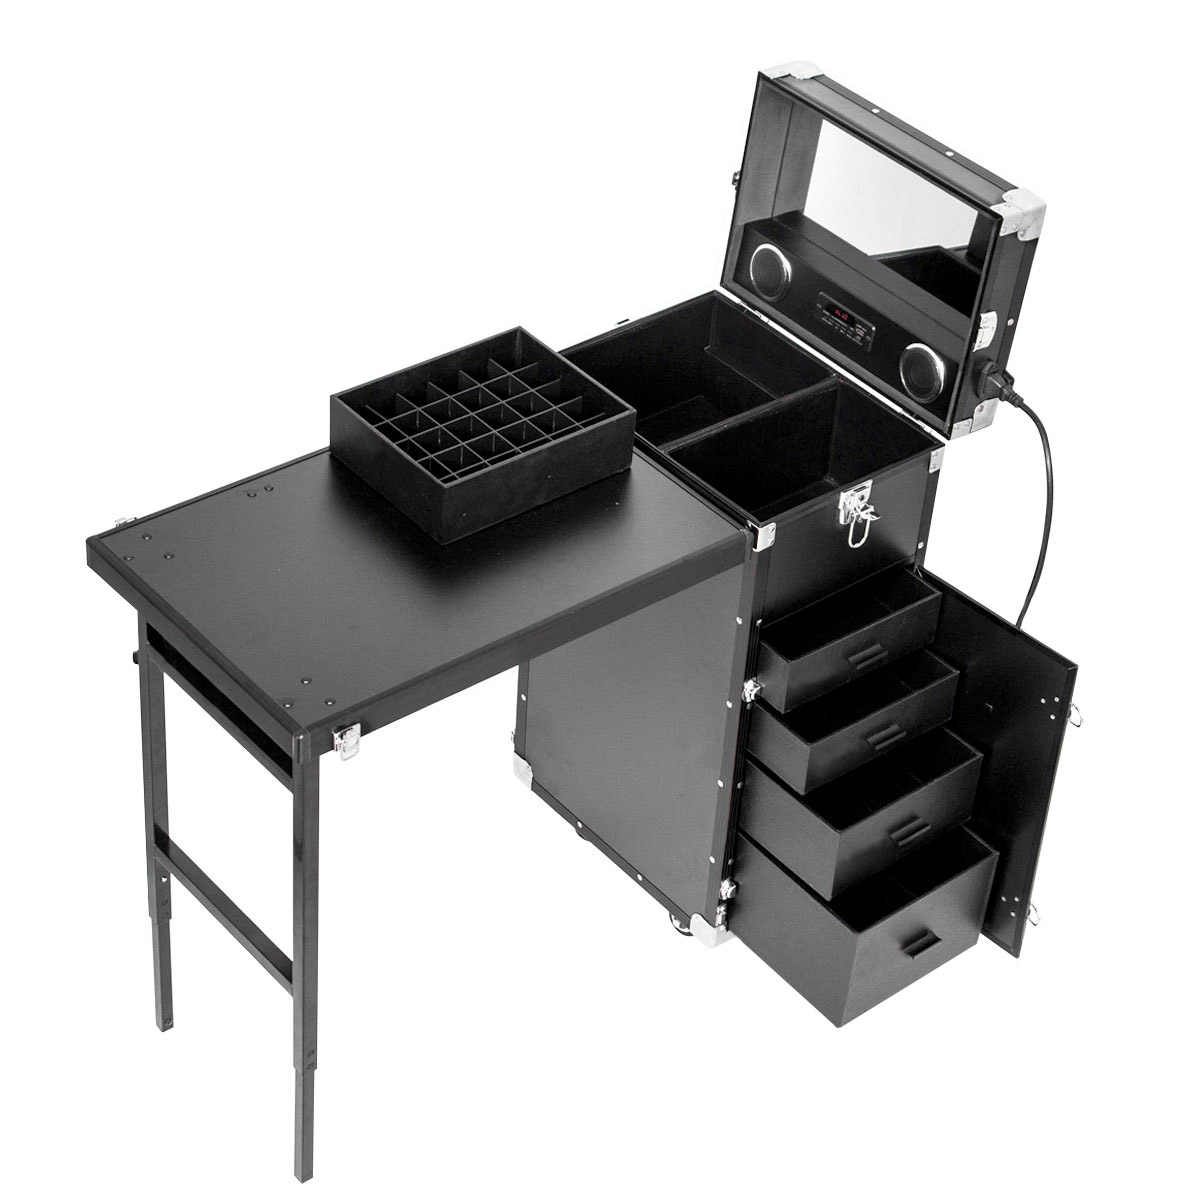 4702 Tattoo Studio Workstation Mobile Workstation Tattoo Furniture -MDF  Table Tattoo work station (Not Including the Accessories)